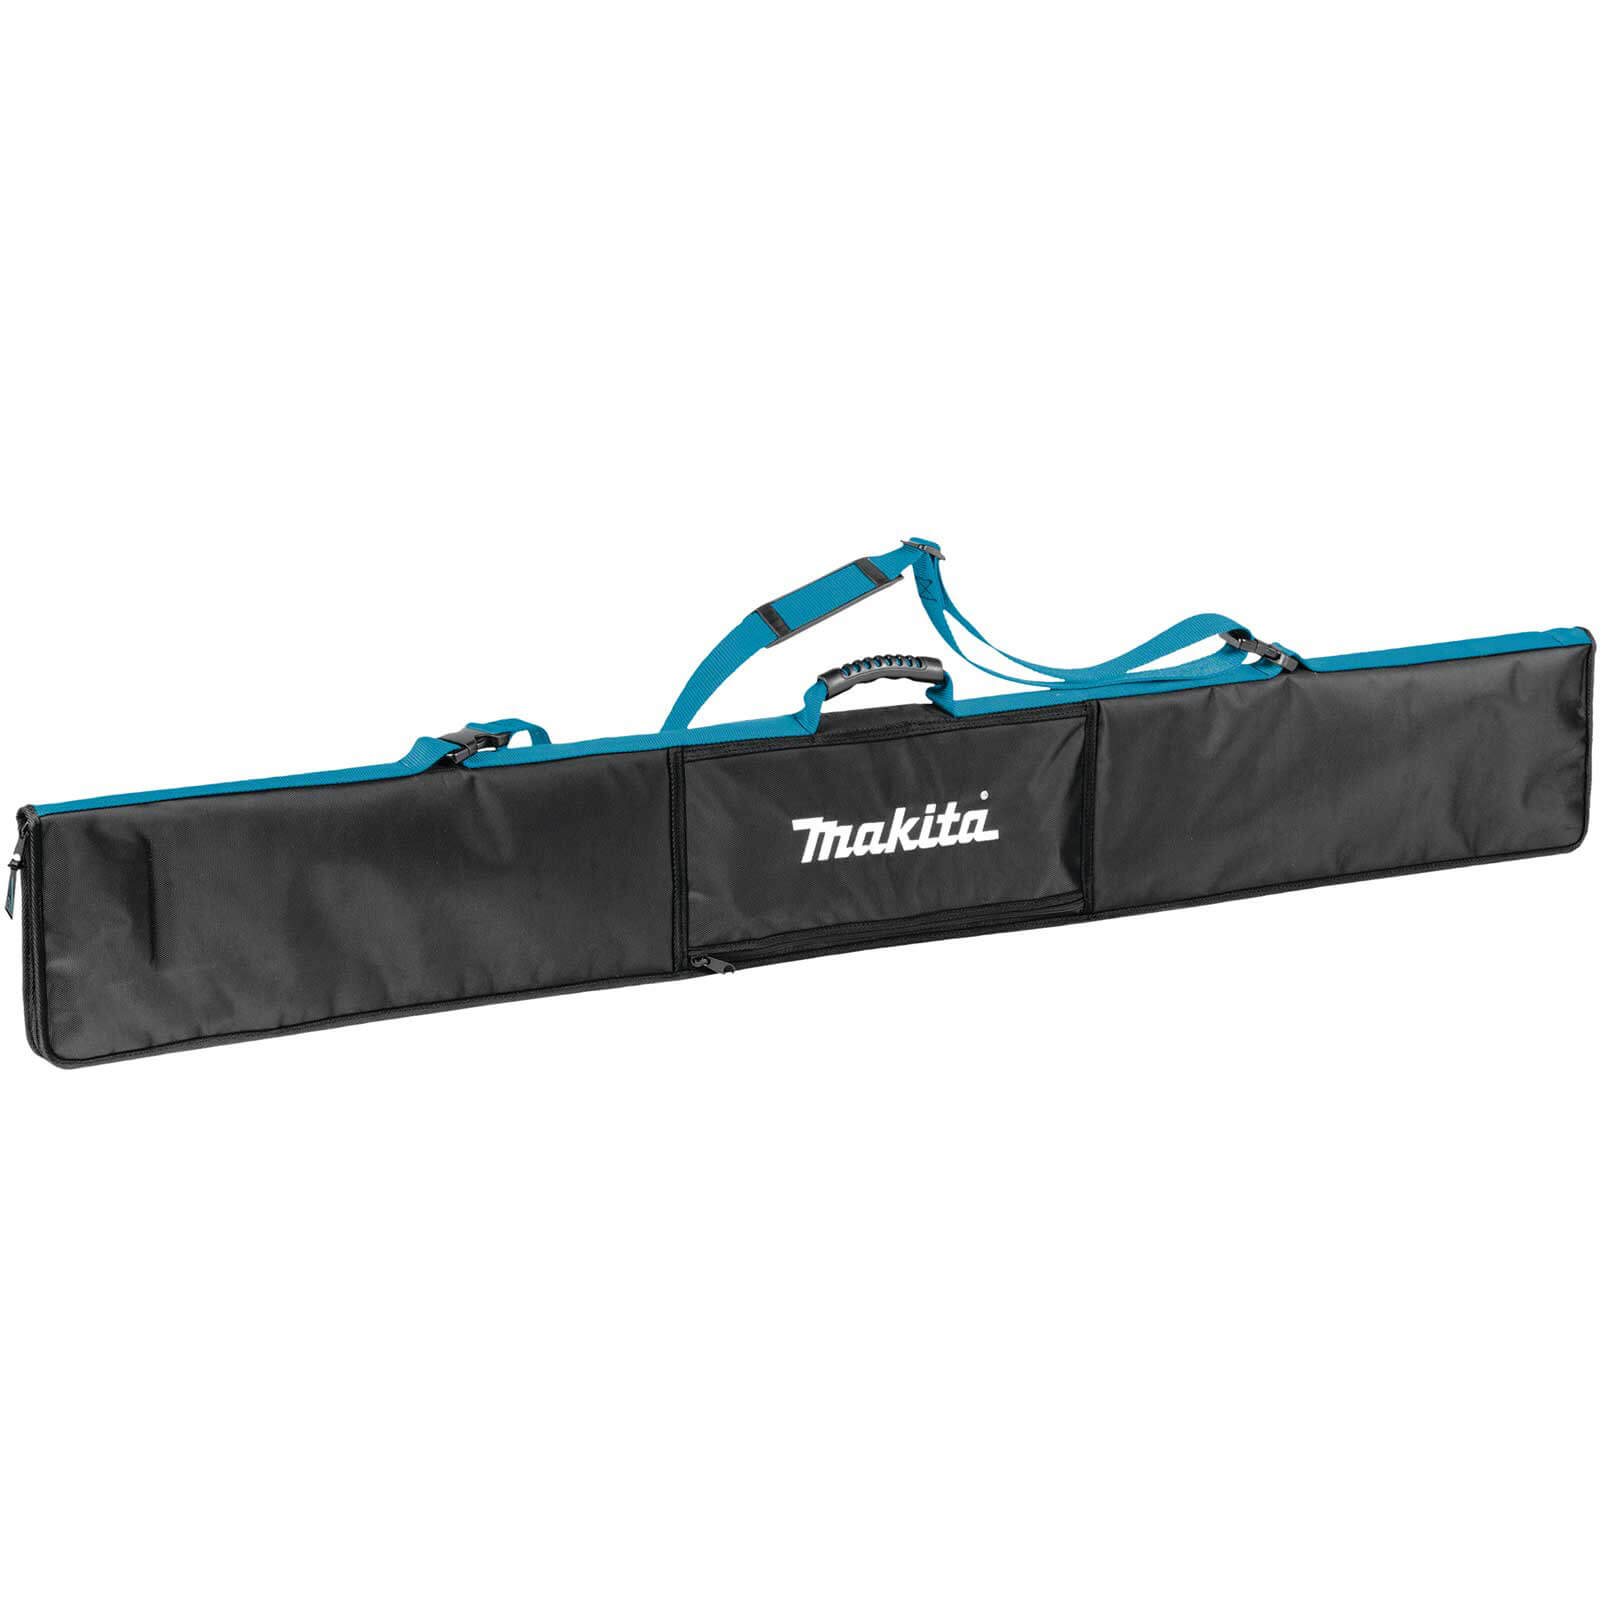 Makita Plunge Saw Guide Rail Carry Bag 1500mm